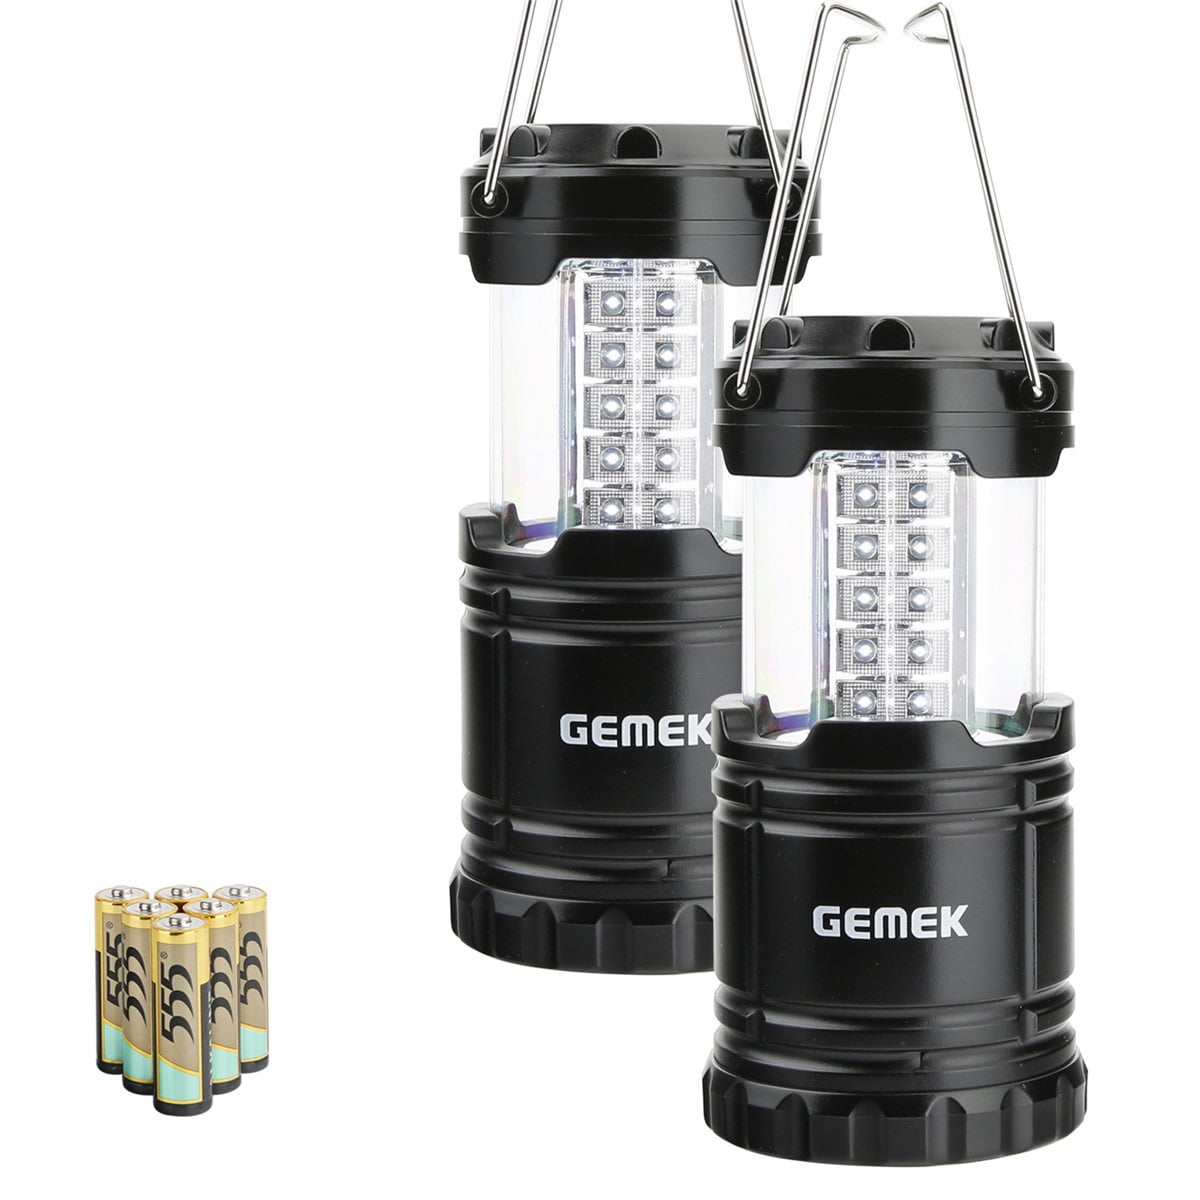 Black Very Bright Mini Lantern 11 LED Batteries Included Camping Emergency 